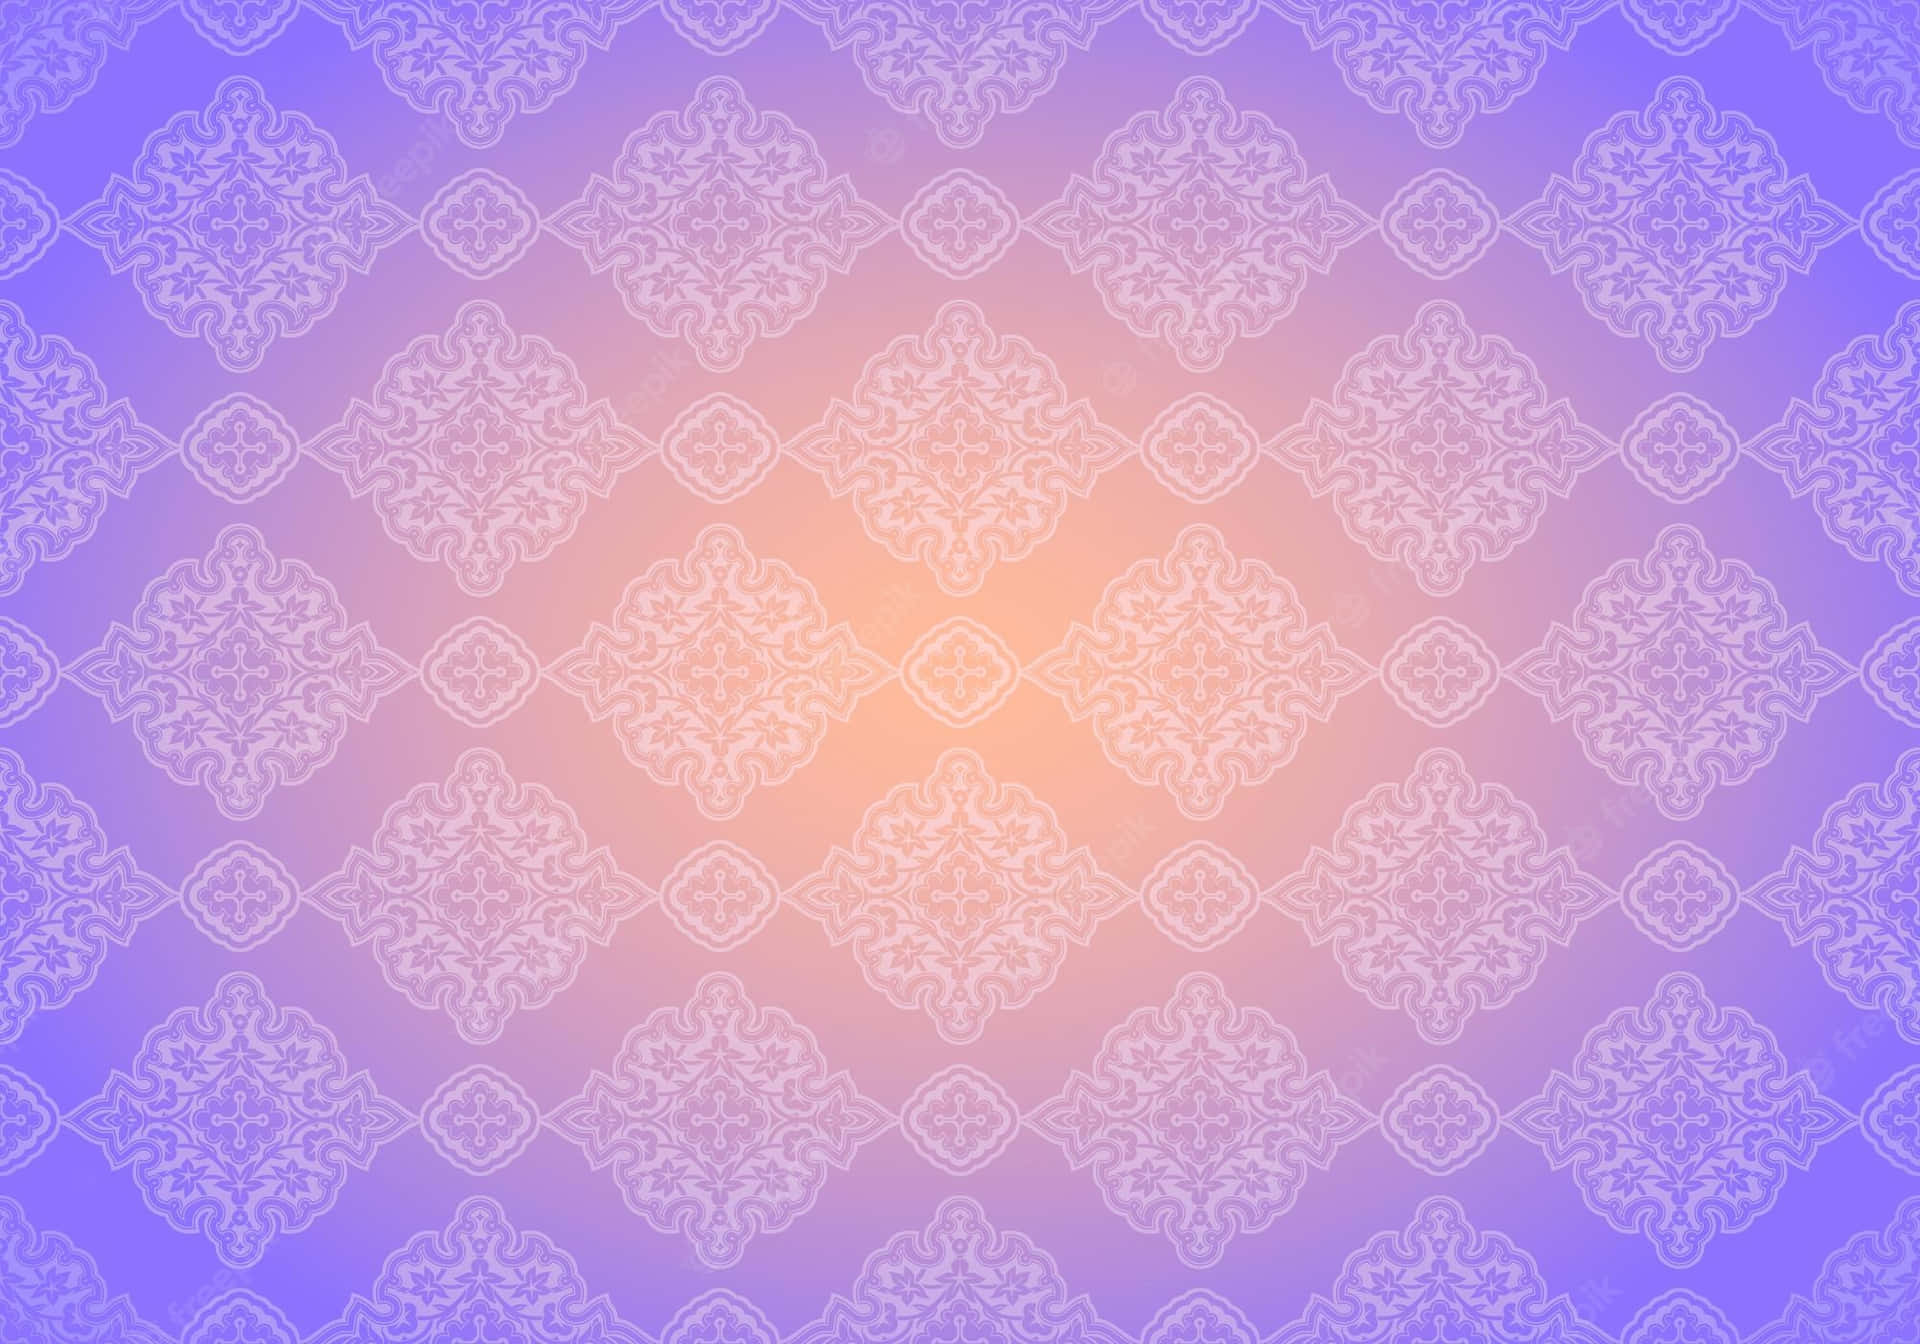 A Close Up Of A Light Purple Lilac Flower With An Ombre Background Of Varying Lilac Colors. Wallpaper